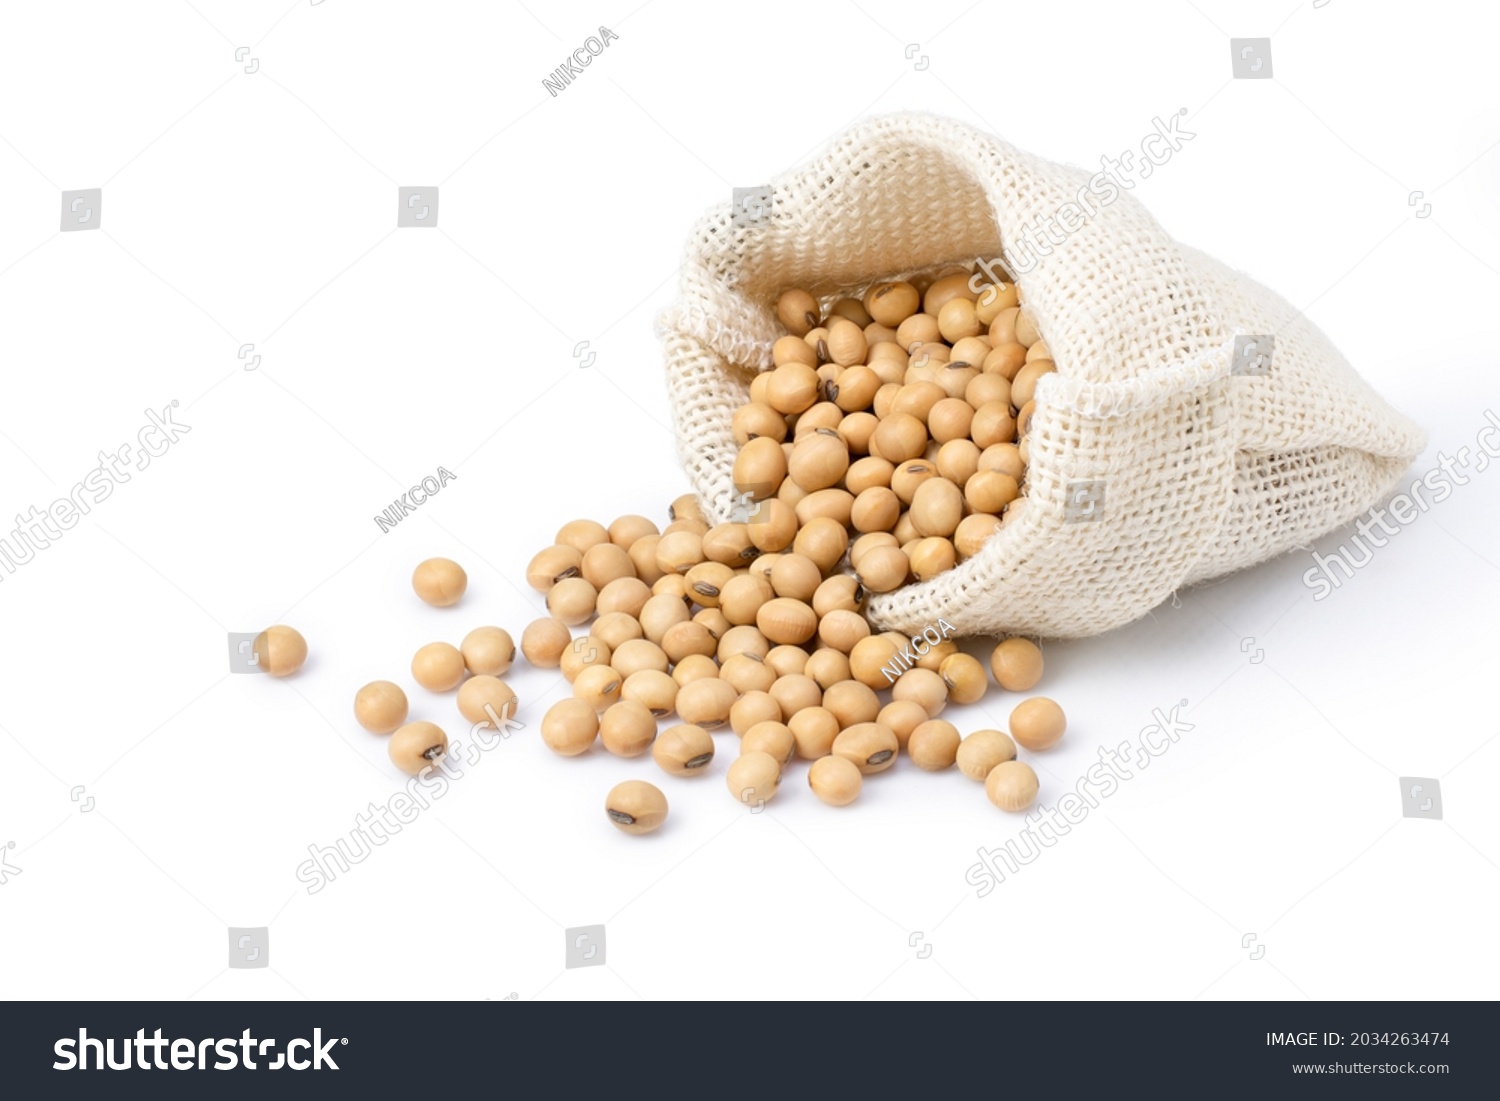 Soybeans in sack bag isolated on white background. #2034263474